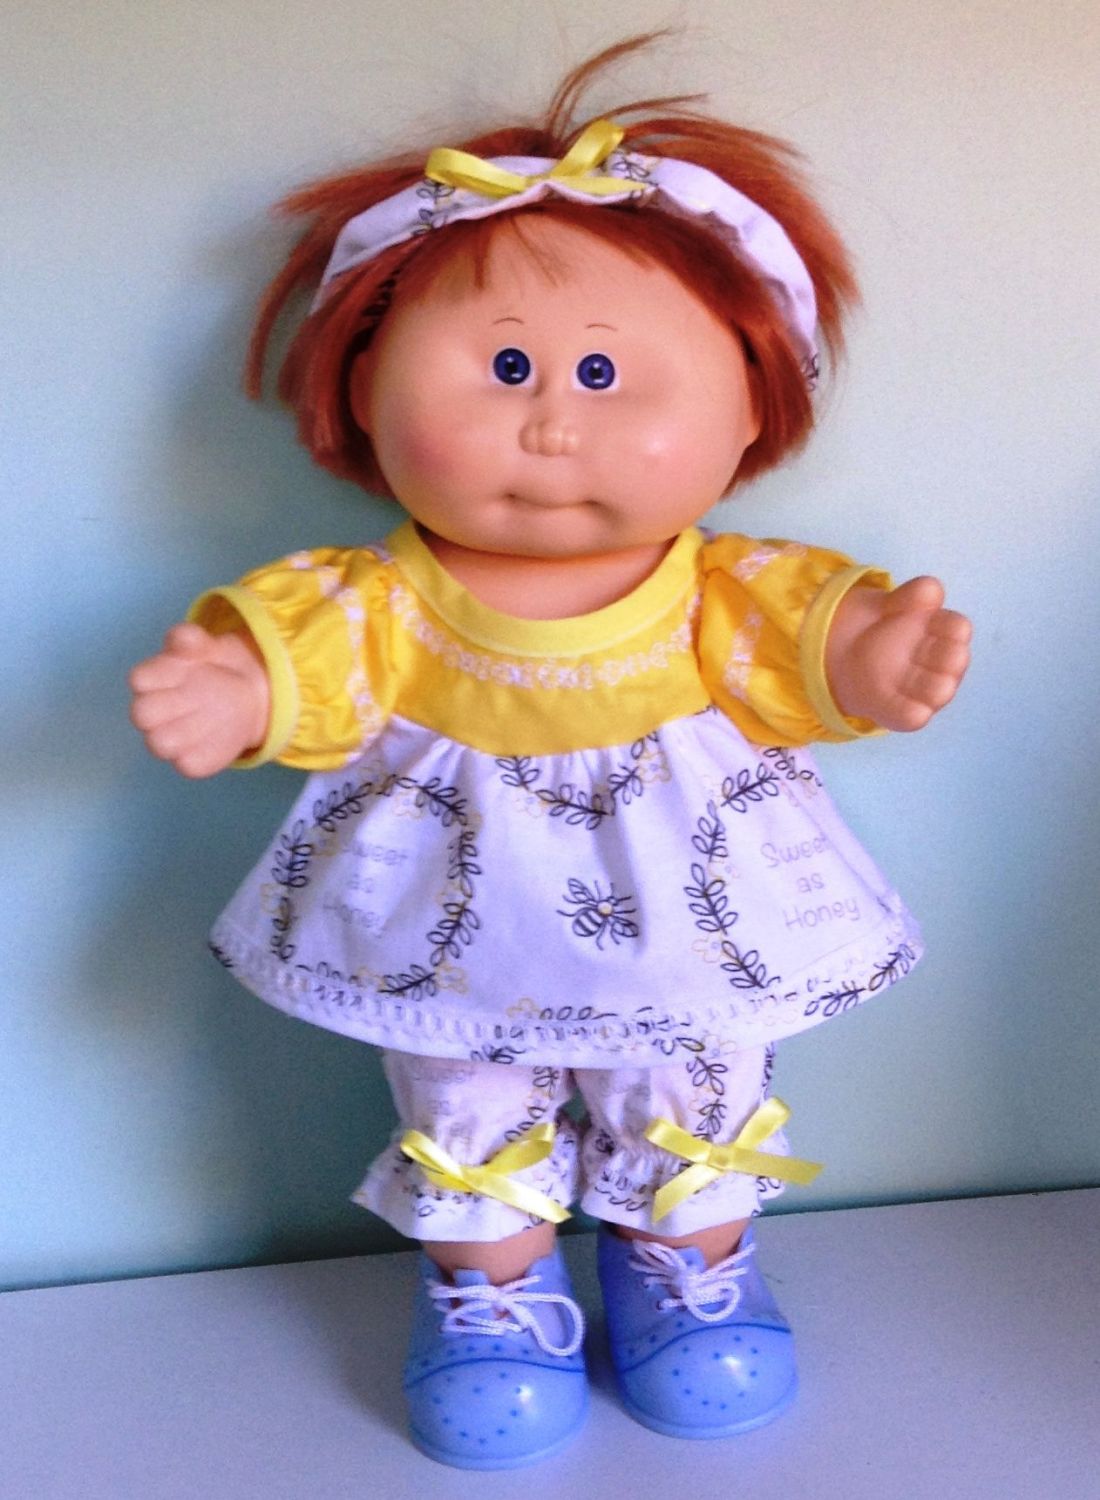 Doll's dress,rompers and Alice band made to fit a 14 inch high Cabbage Patc